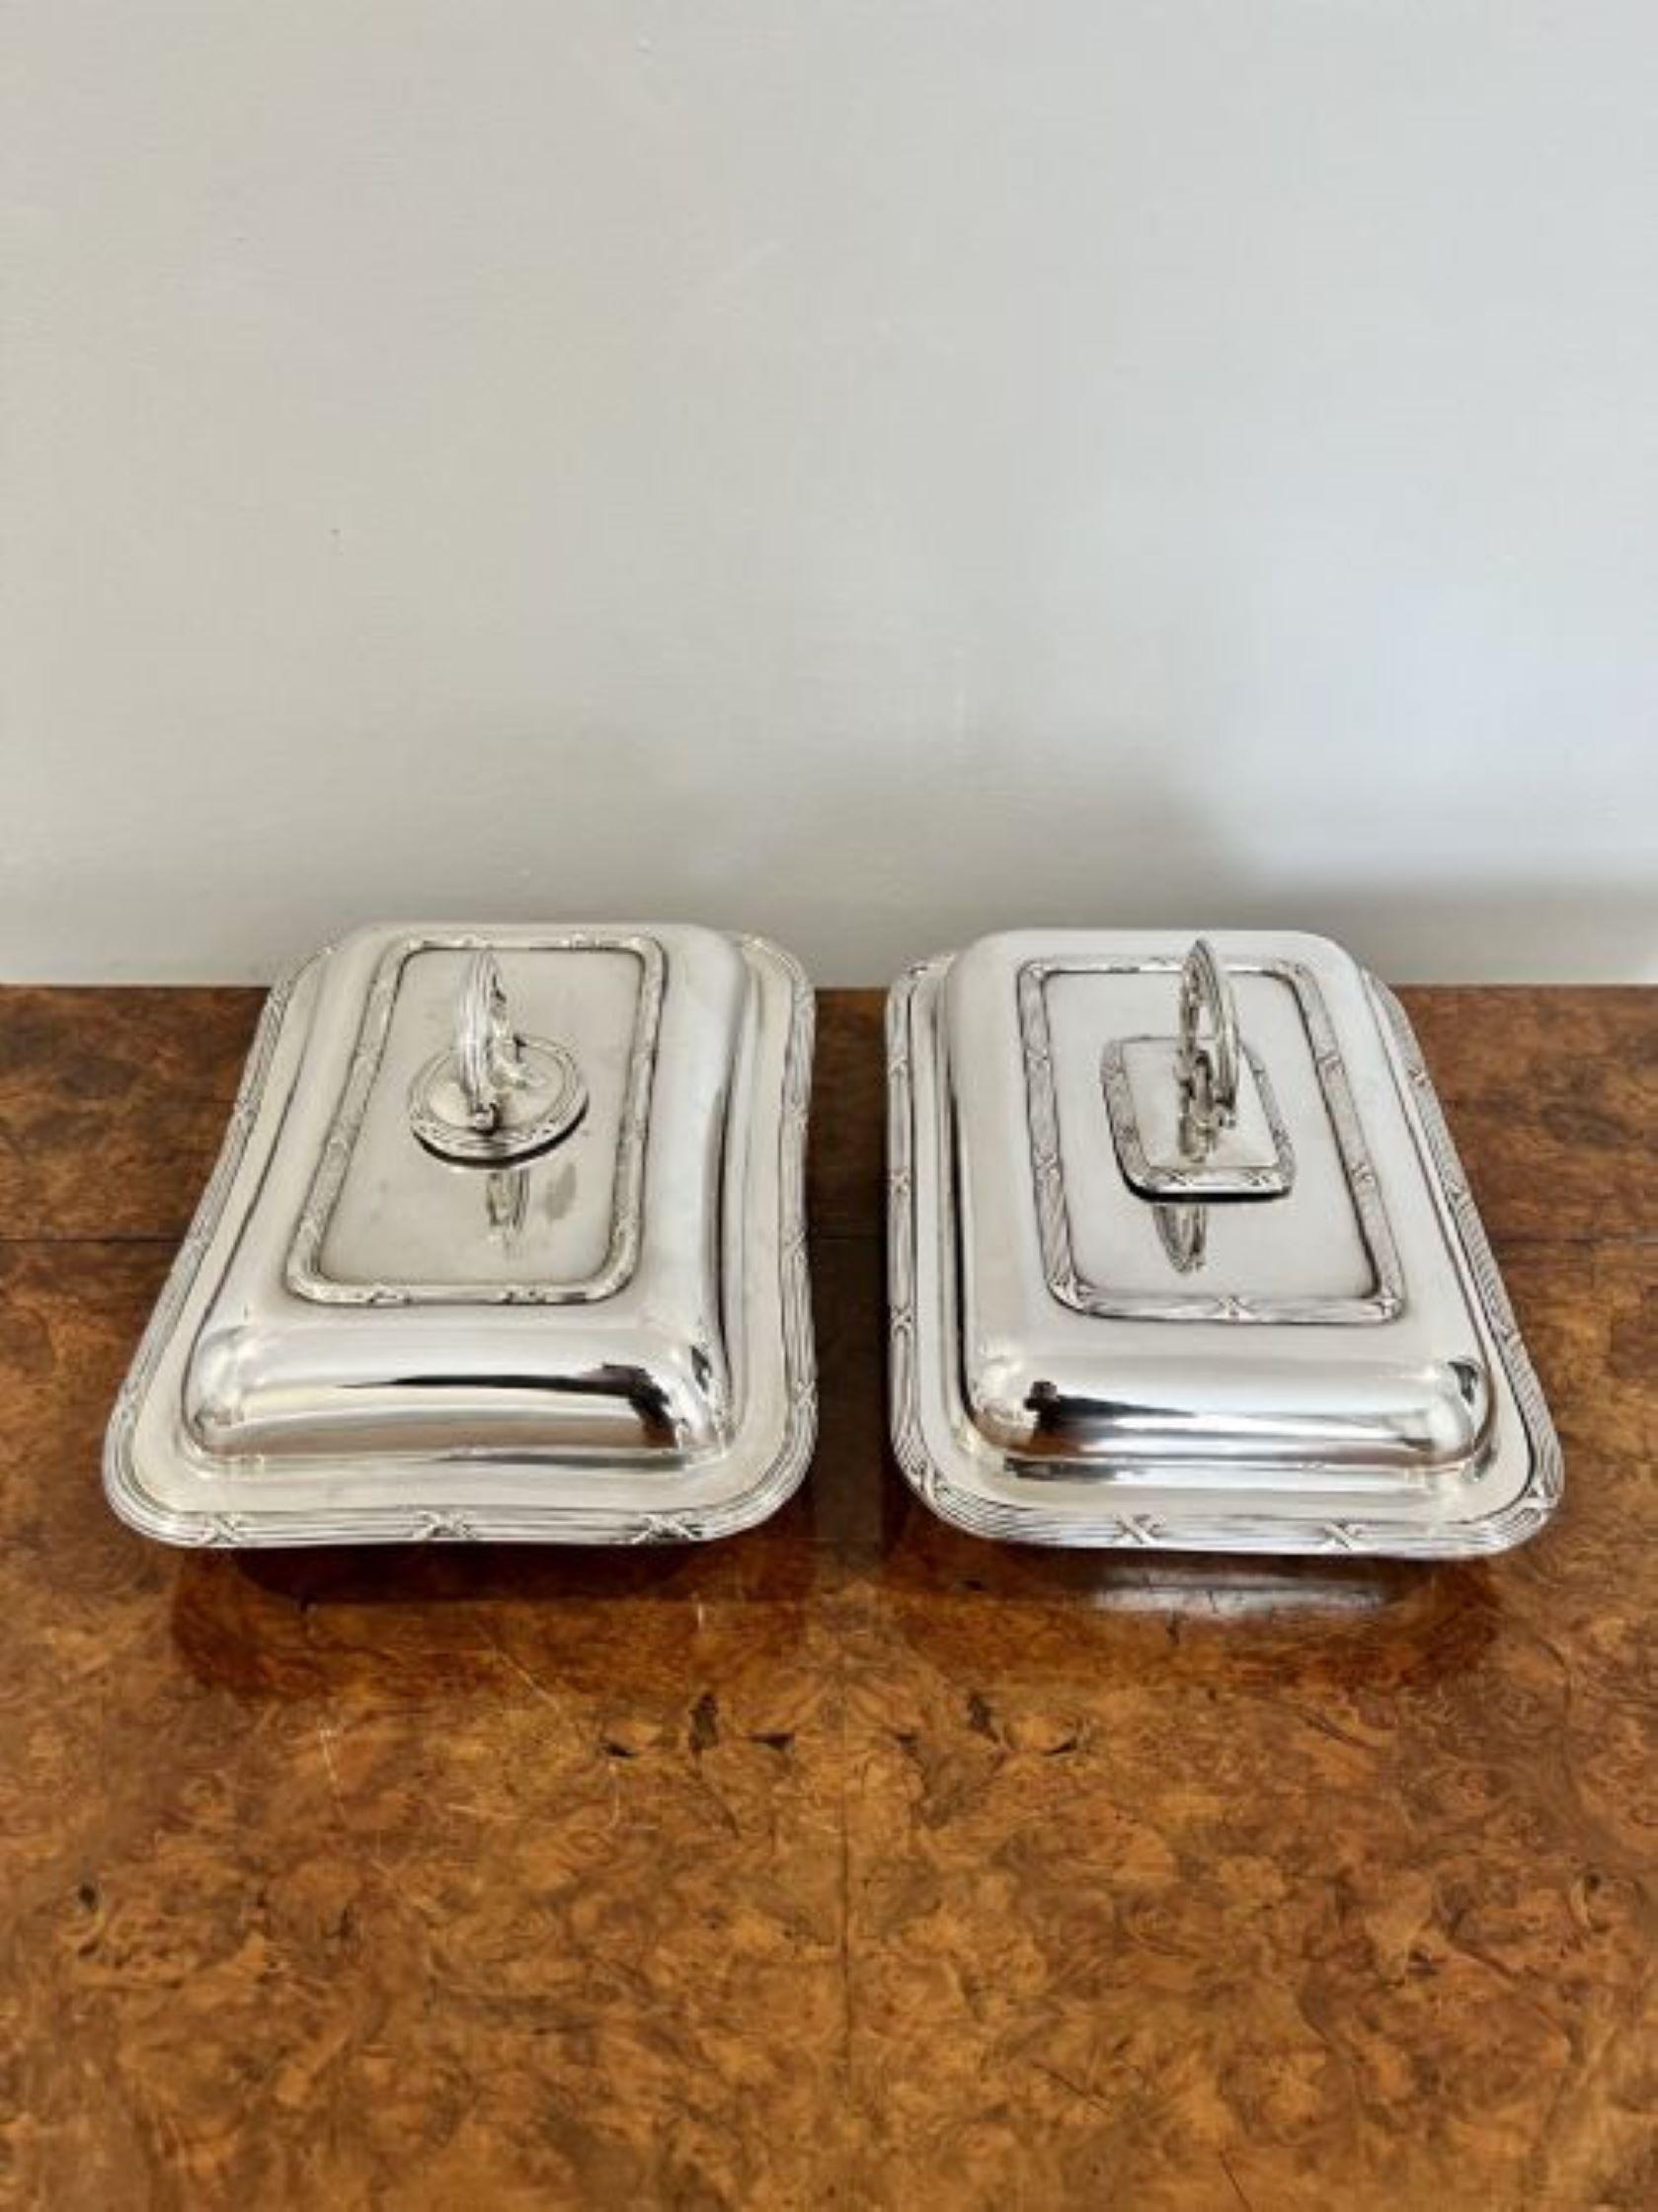 Pair of antique Edwardian silver plated entree dishes having a quality pair of silver plated rectangular entree dishes with removable lids, ornate detail and ornate handles.